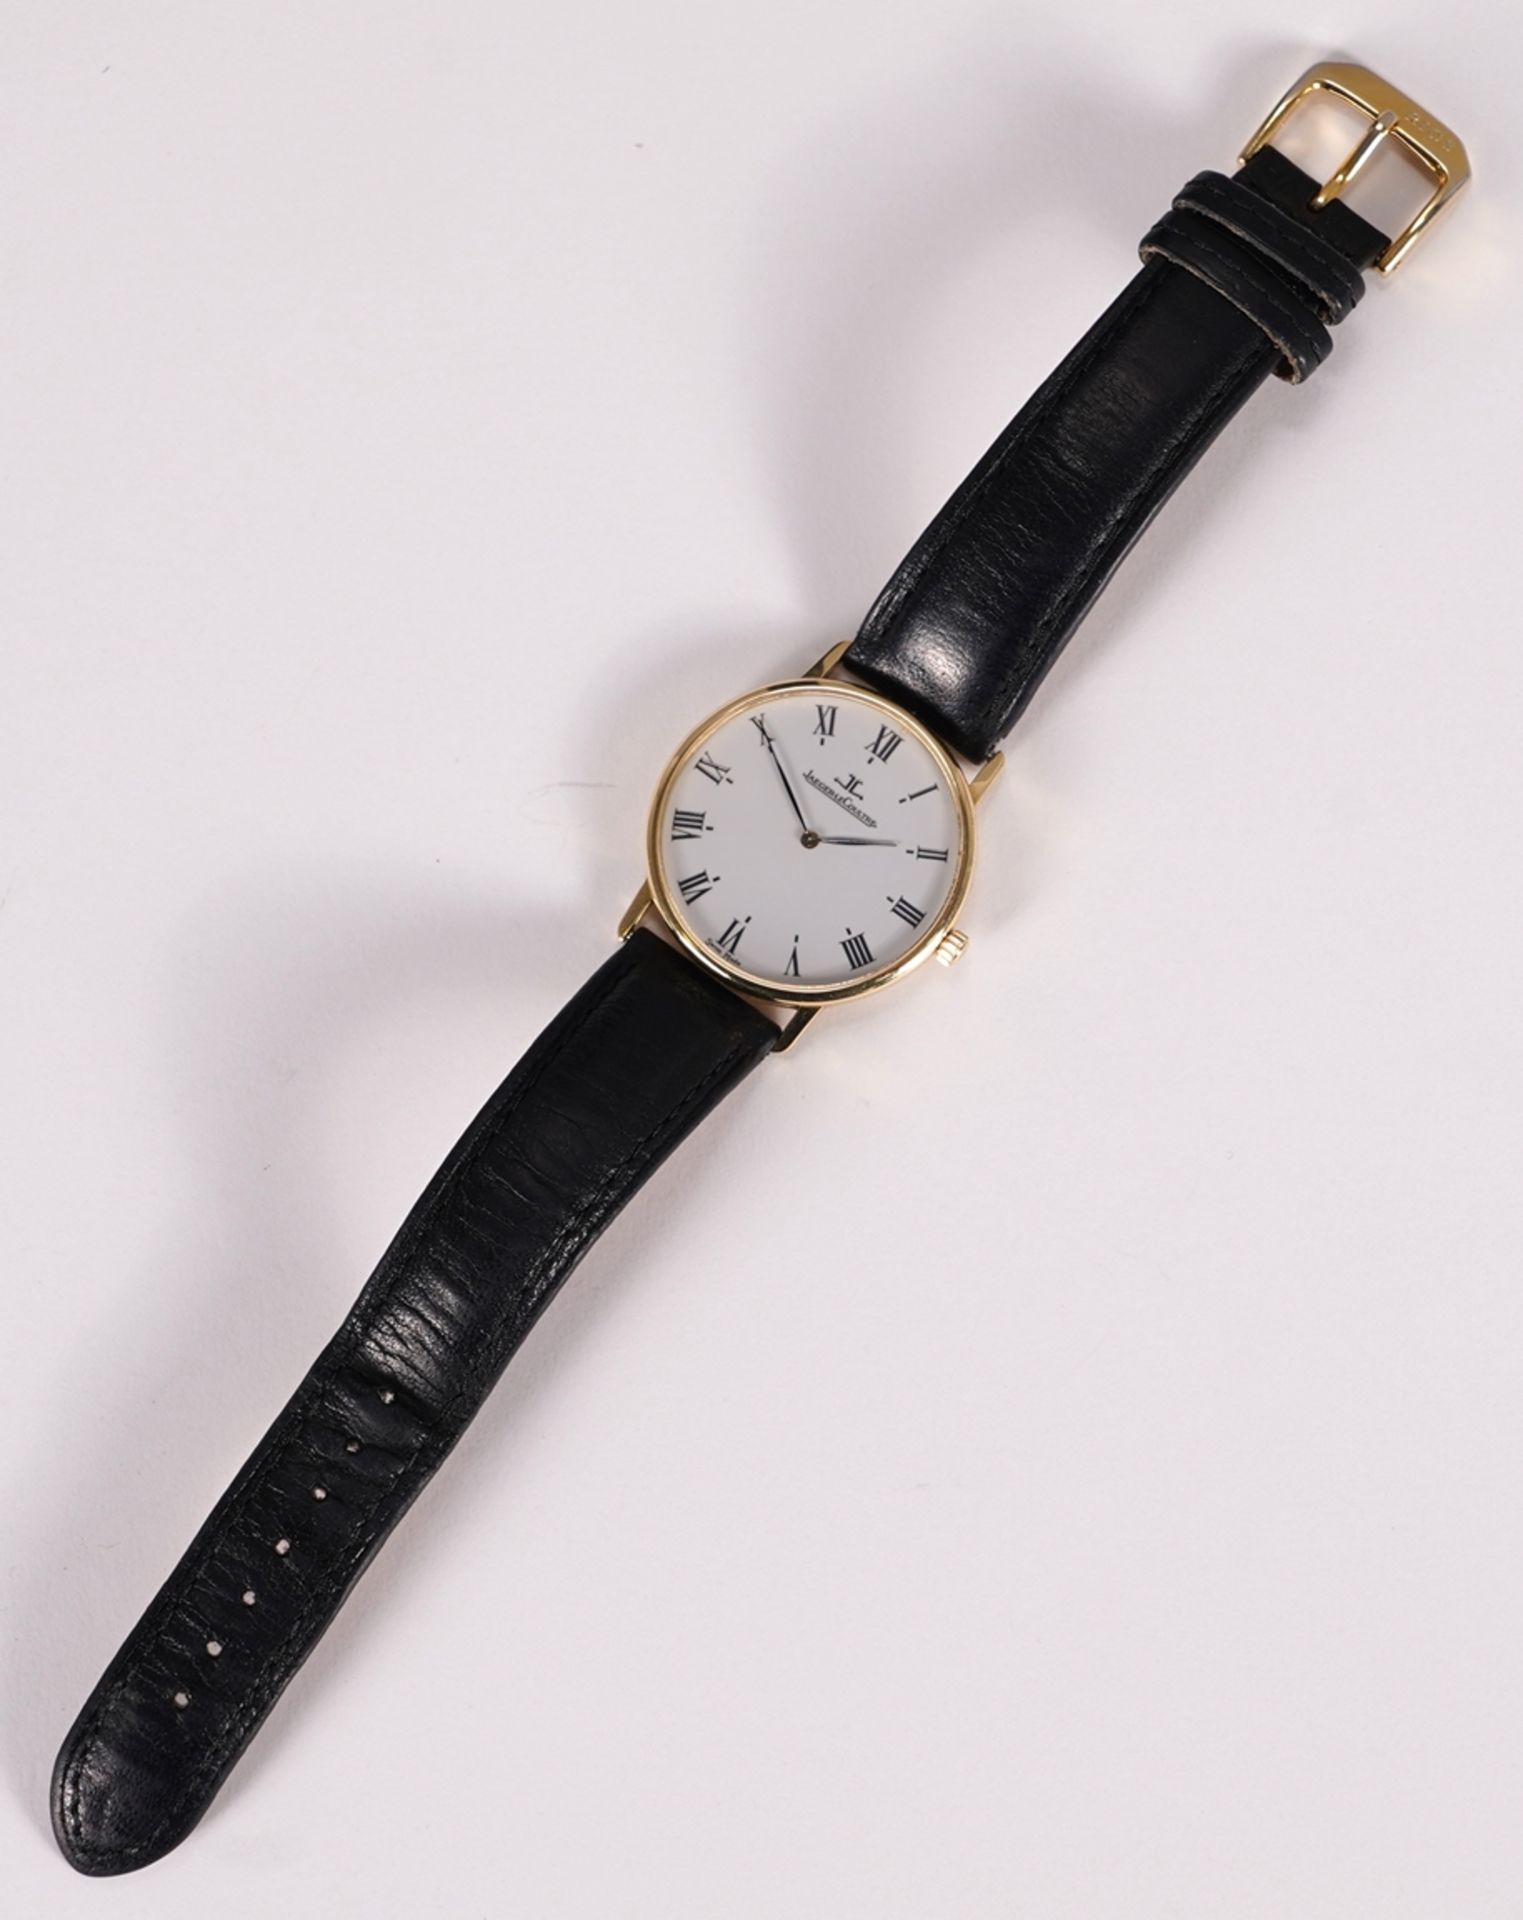 Jaeger Lecoultre Classic wristwatch - Image 3 of 6